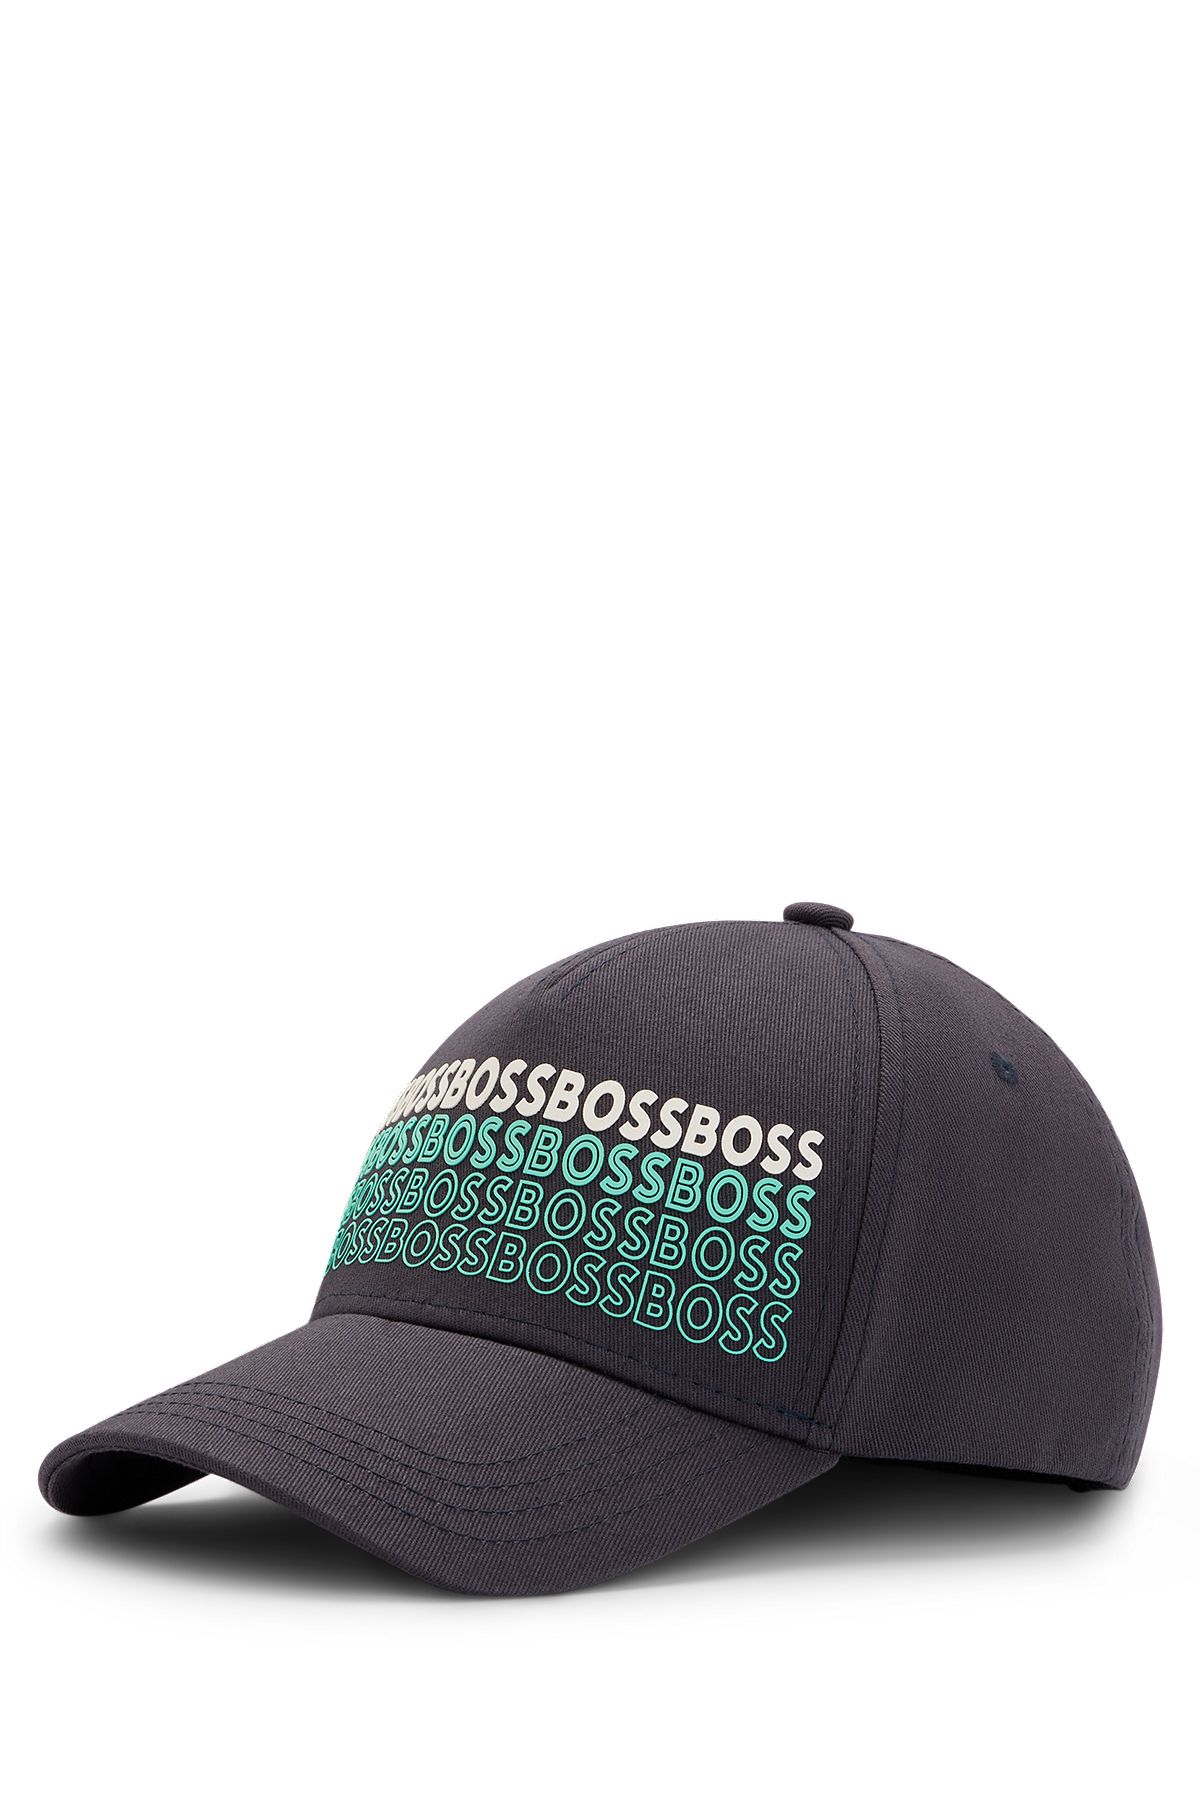 Cotton-twill repeat-logo print with - BOSS cap